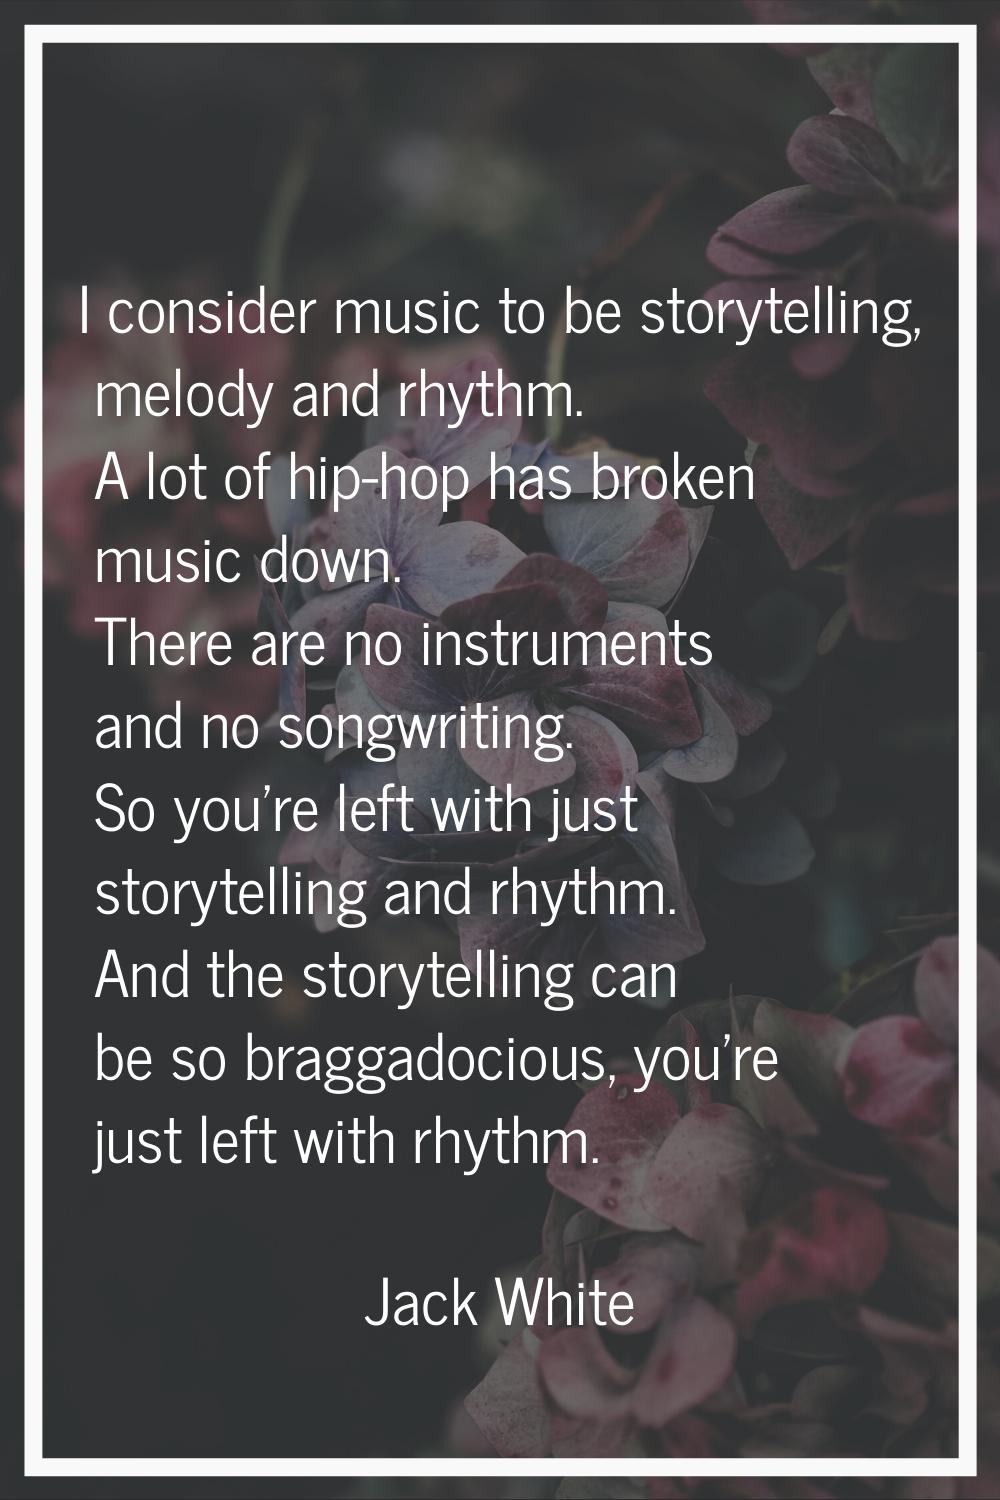 I consider music to be storytelling, melody and rhythm. A lot of hip-hop has broken music down. The